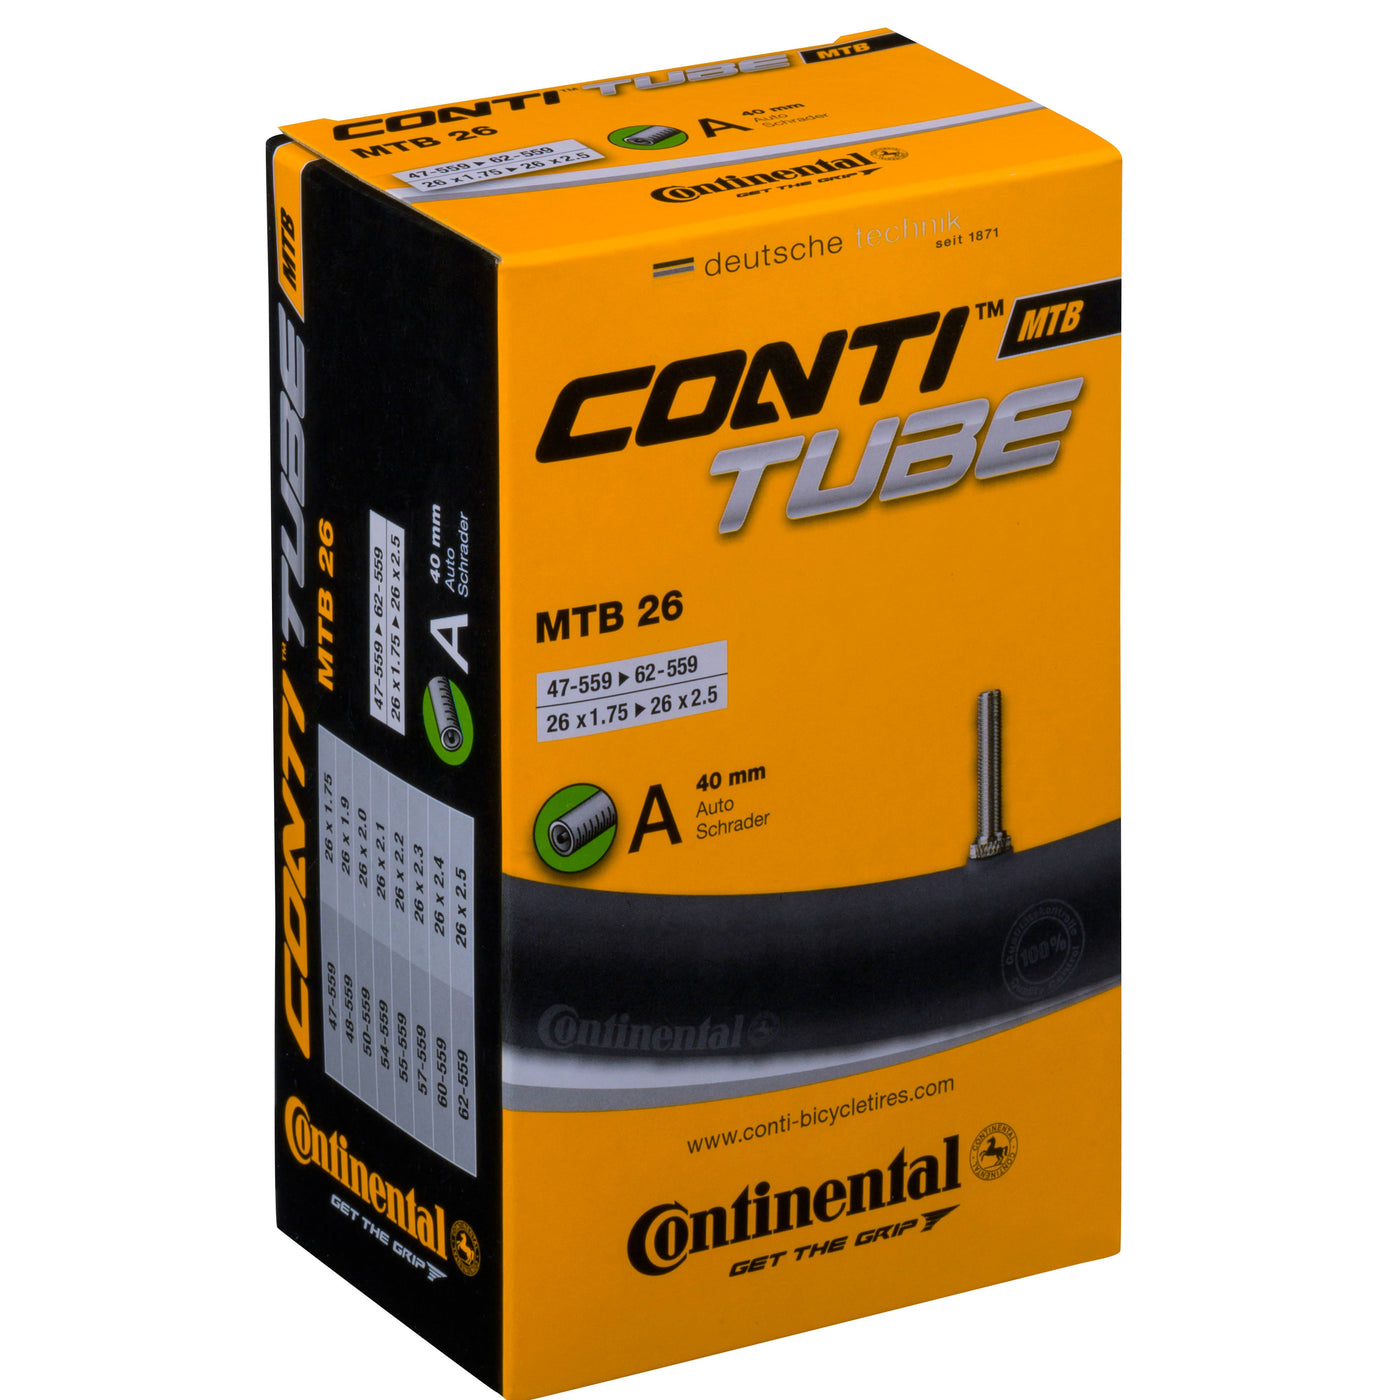 Continental 26 x 1.75-2.5 MTB Schrader Tube 40mm - 200g - Cyclop.in